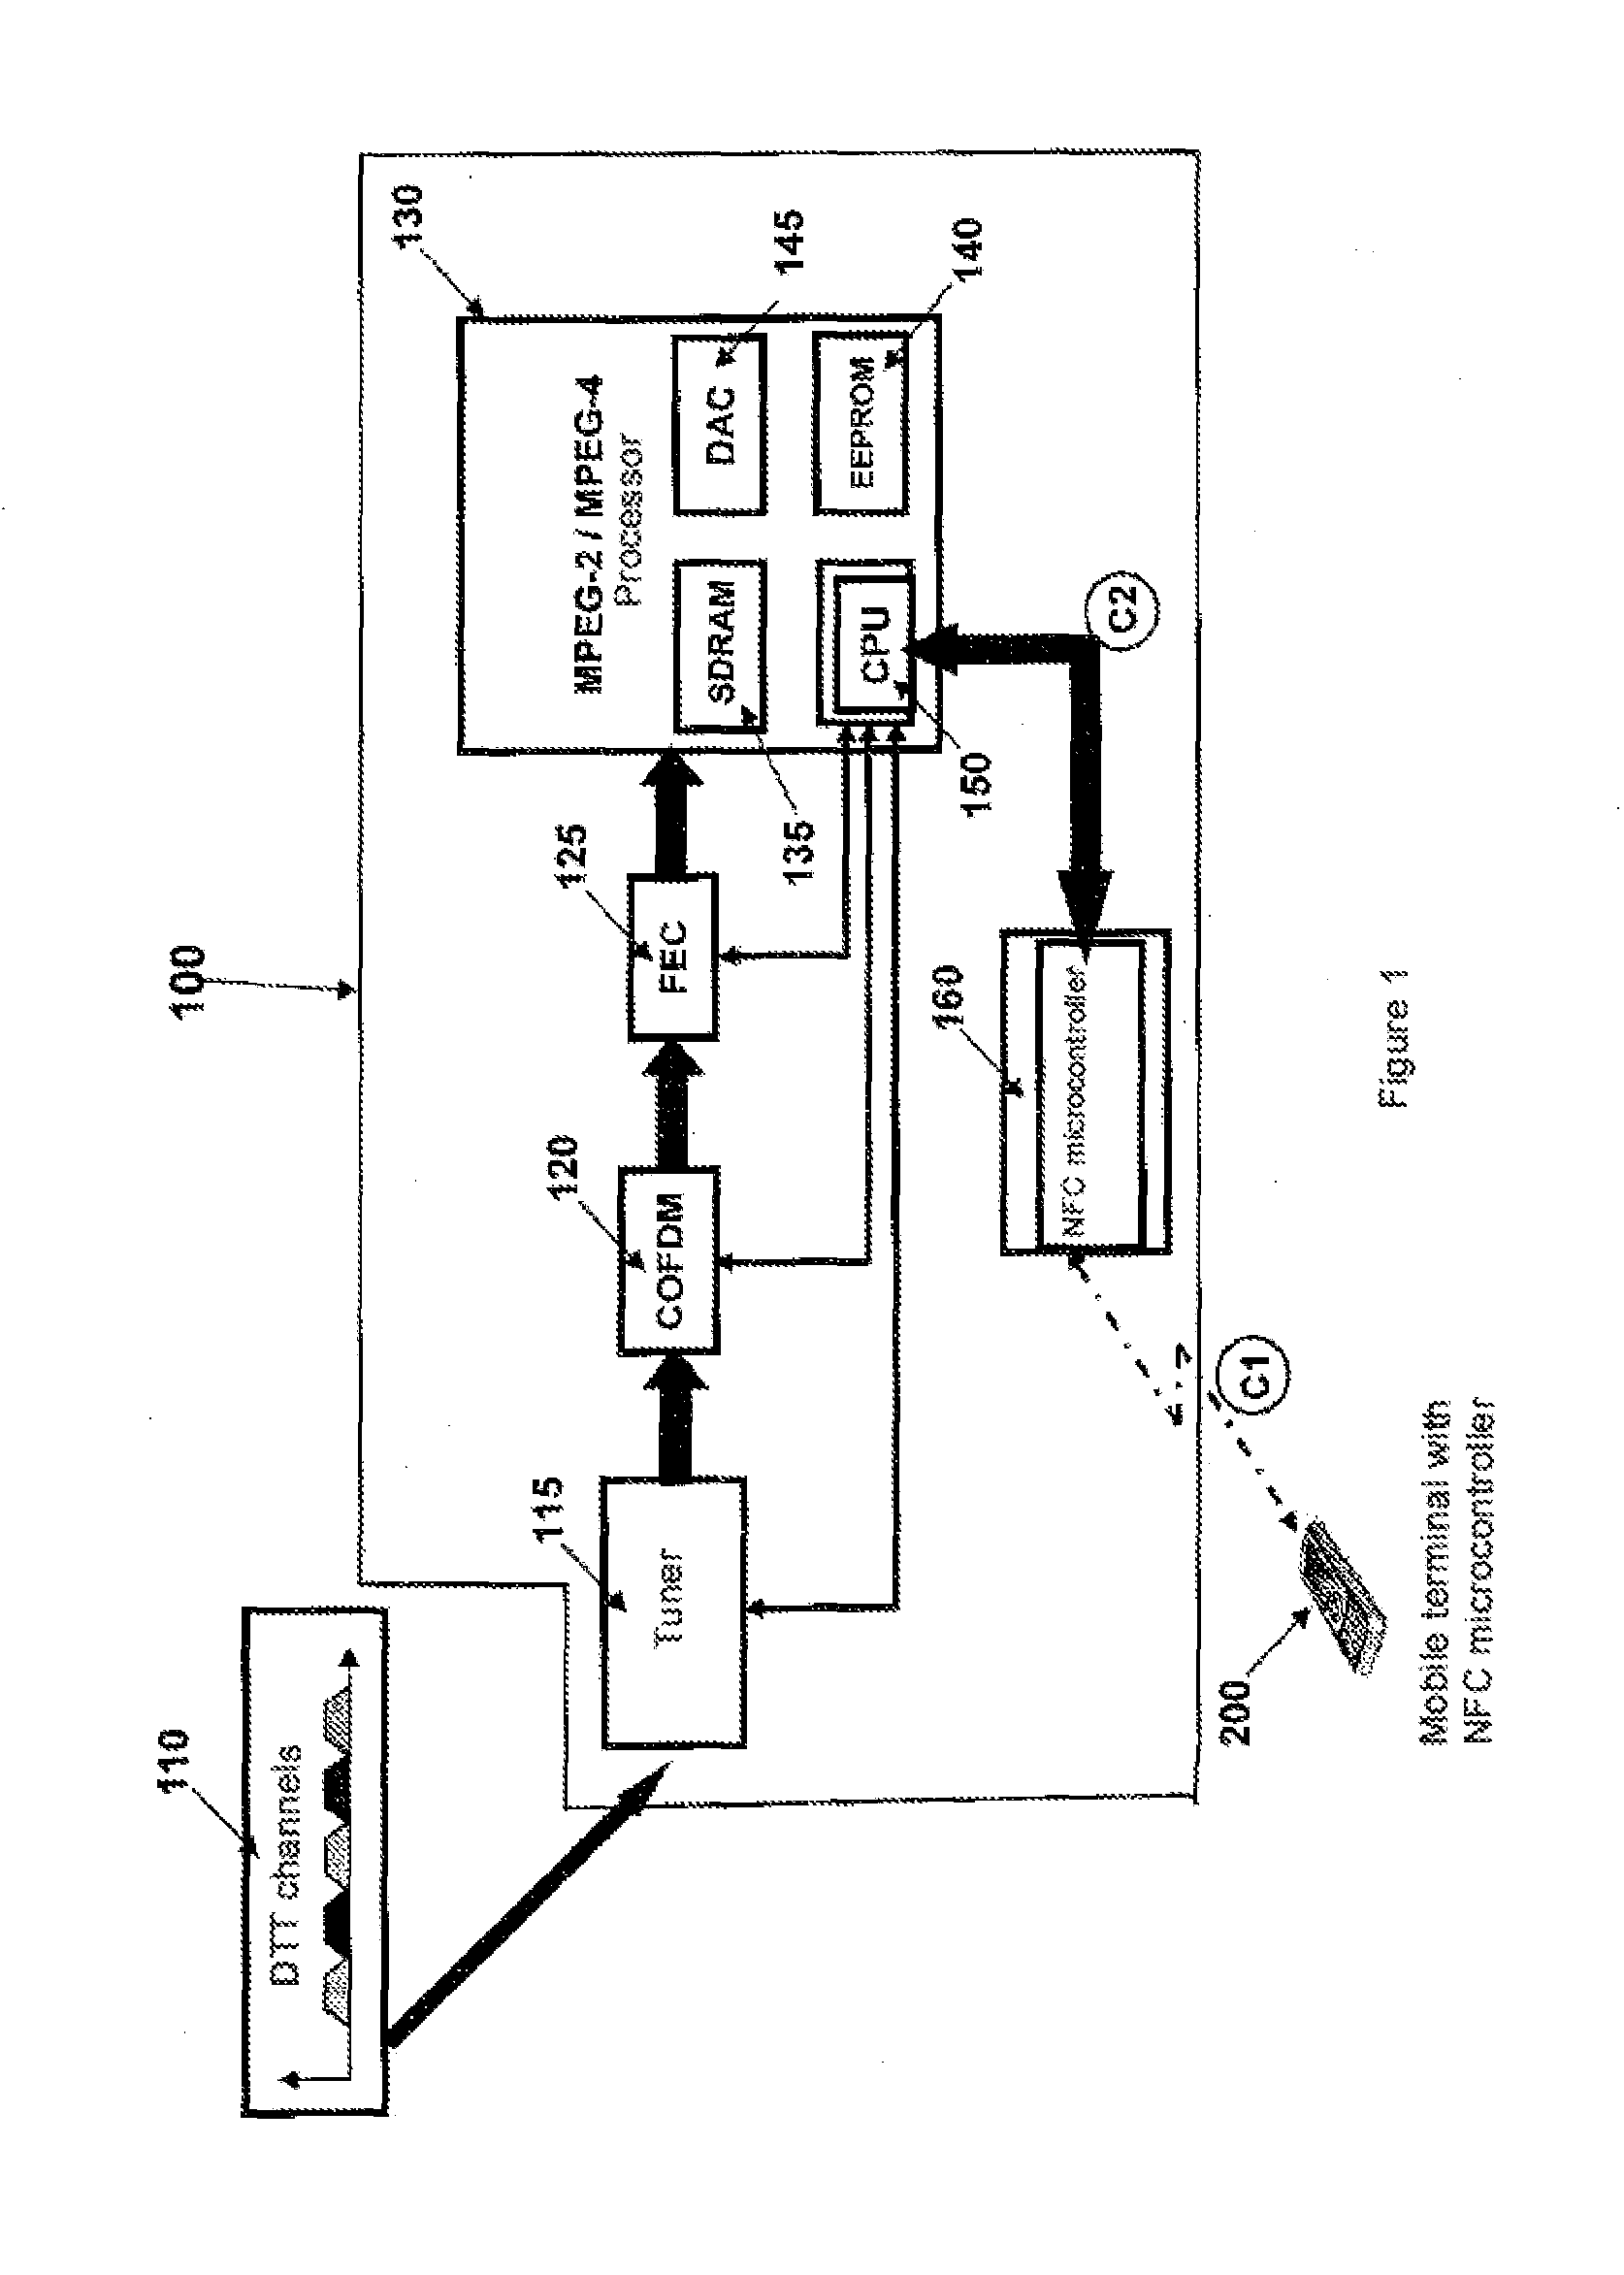 System and method for controlling access to contents